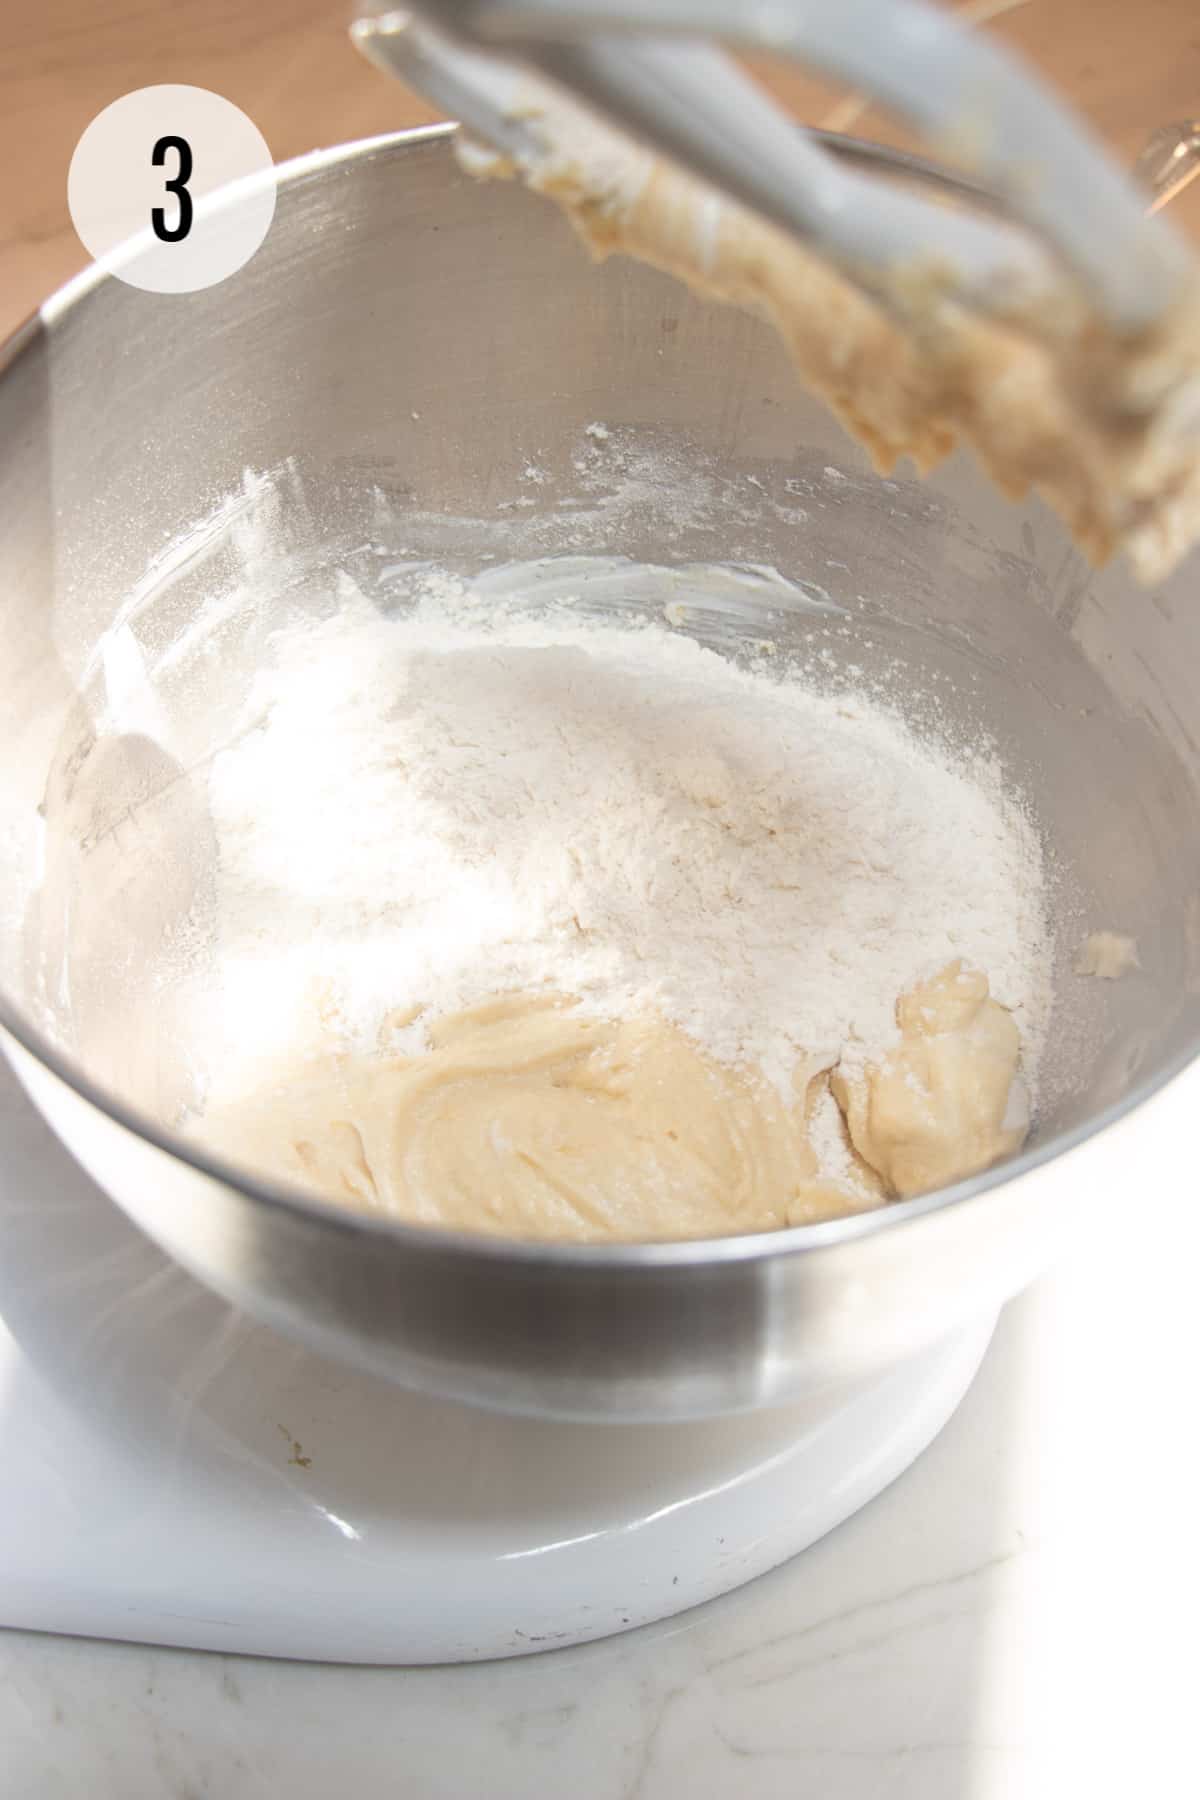 Lemon cookie batter with flour added to a silver bowl mixed by a white mixer paddle. 